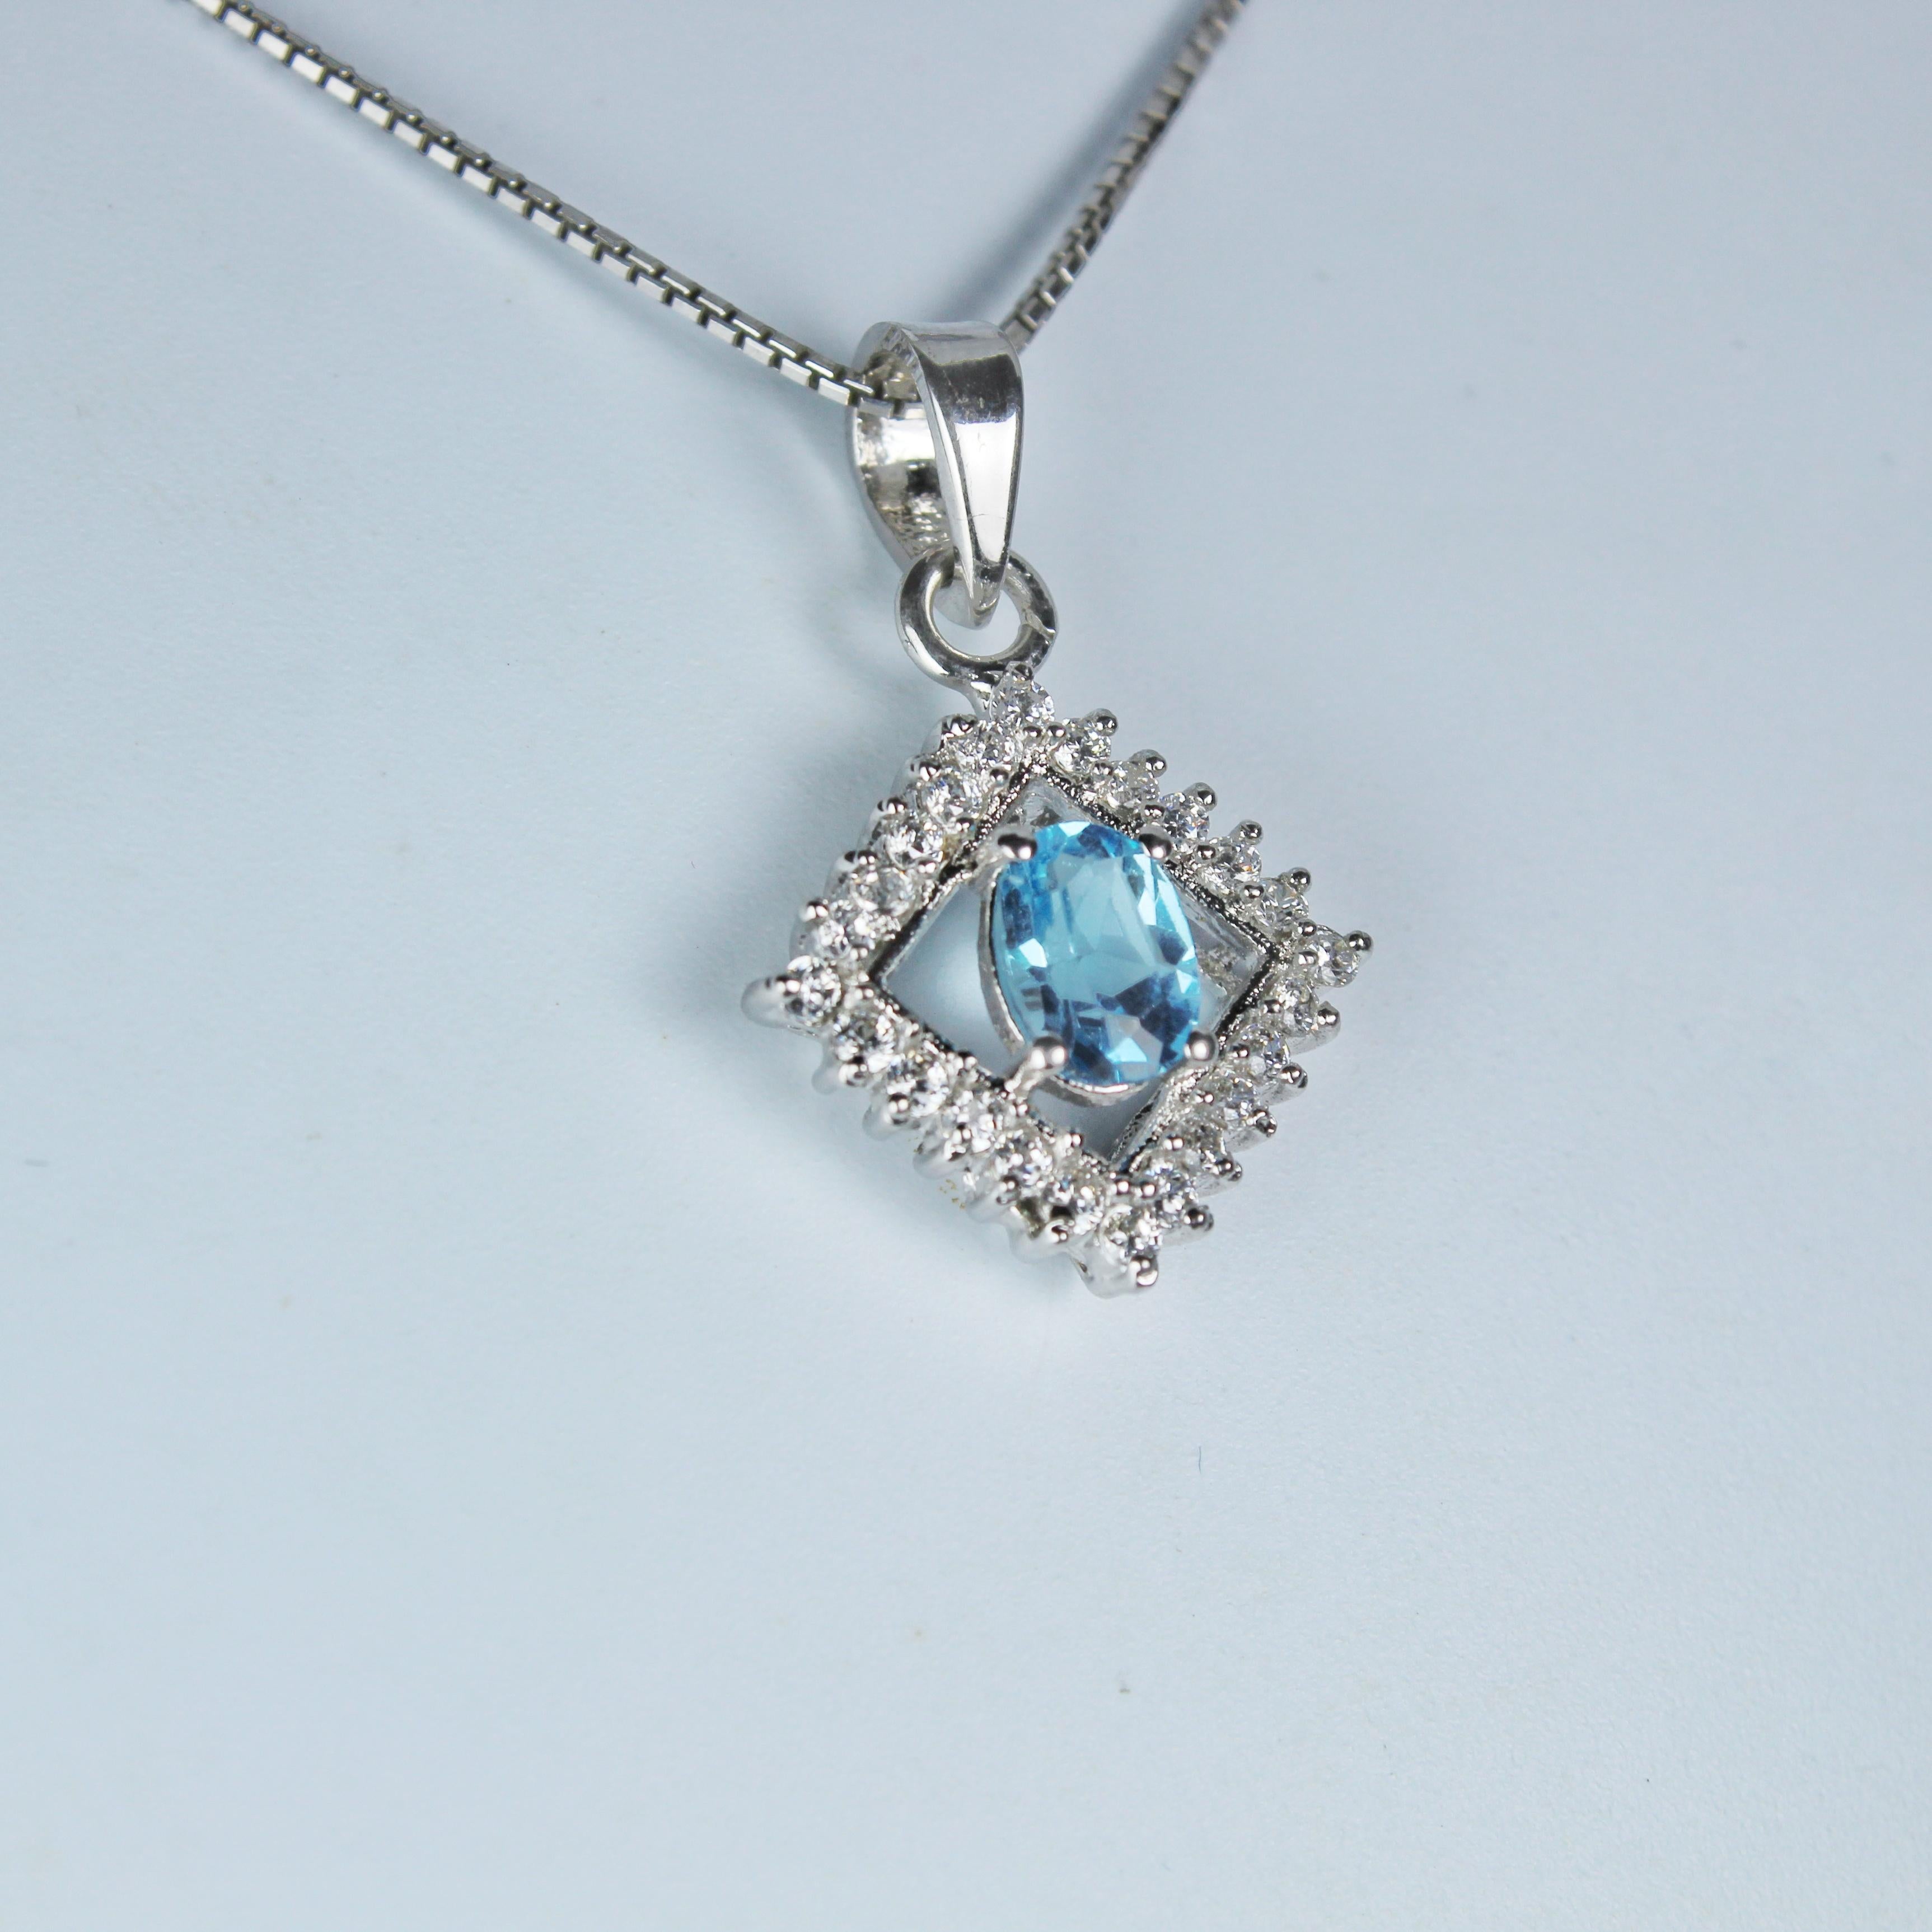 Product Details:

Metal of pendant - Sterling Silver
Diamonds - synthetic
Pendant size (without bail) - 15 x 15 mm
Pendant gross Weight - 2.47 Grams
Gemstone - Aquamarine
Stone weight - 0.50 Carat
Stone shape - Oval
Stone size - 7 x 5 mm

Timeless